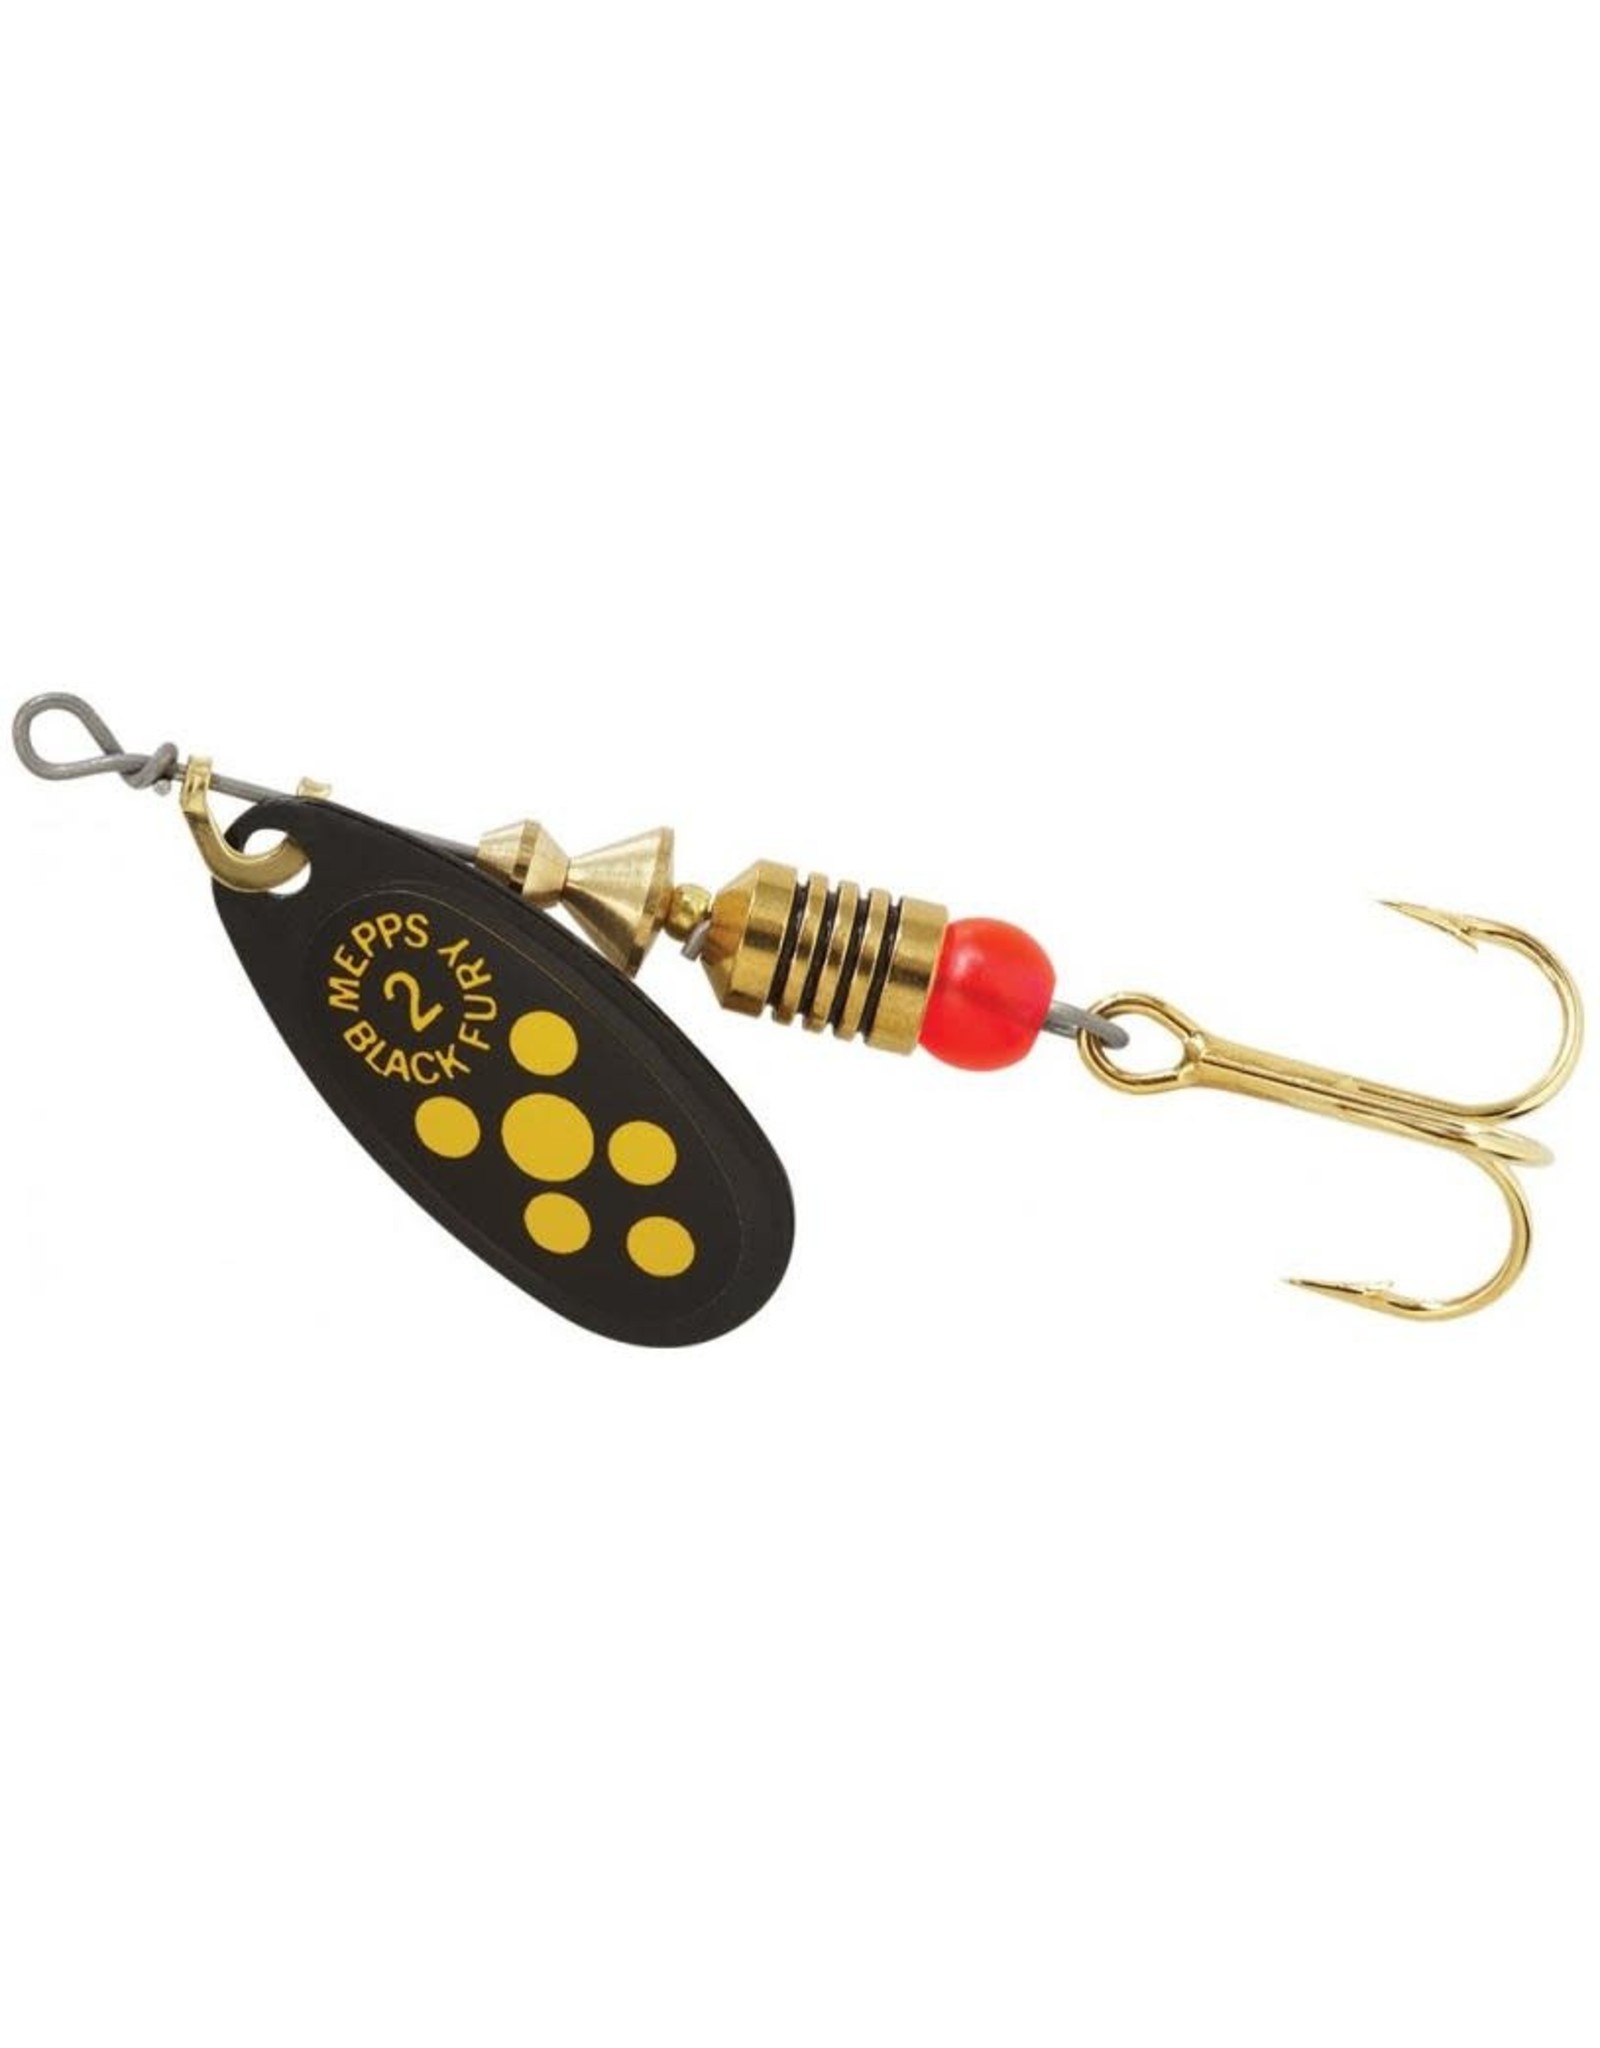 Mepps Mepps Aglia 1/6 Oz. #2 Spinner - Black with Yellow Dots